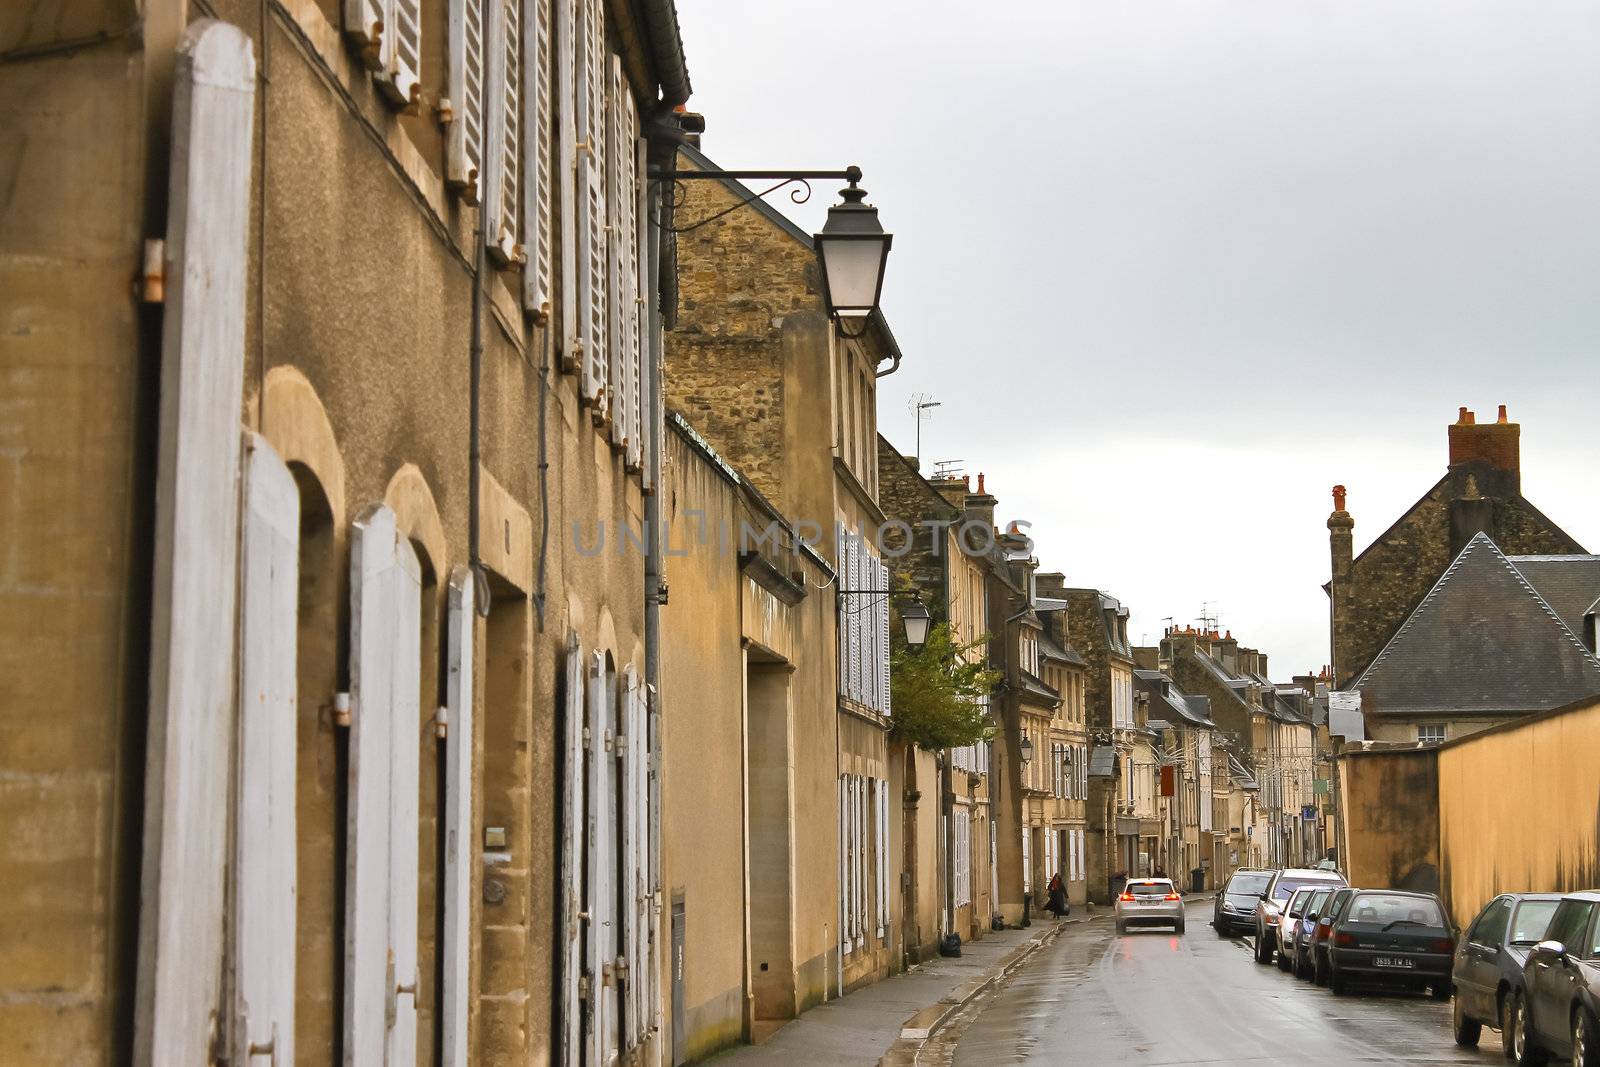 On the streets of Bayeux. Normandy, France by NickNick